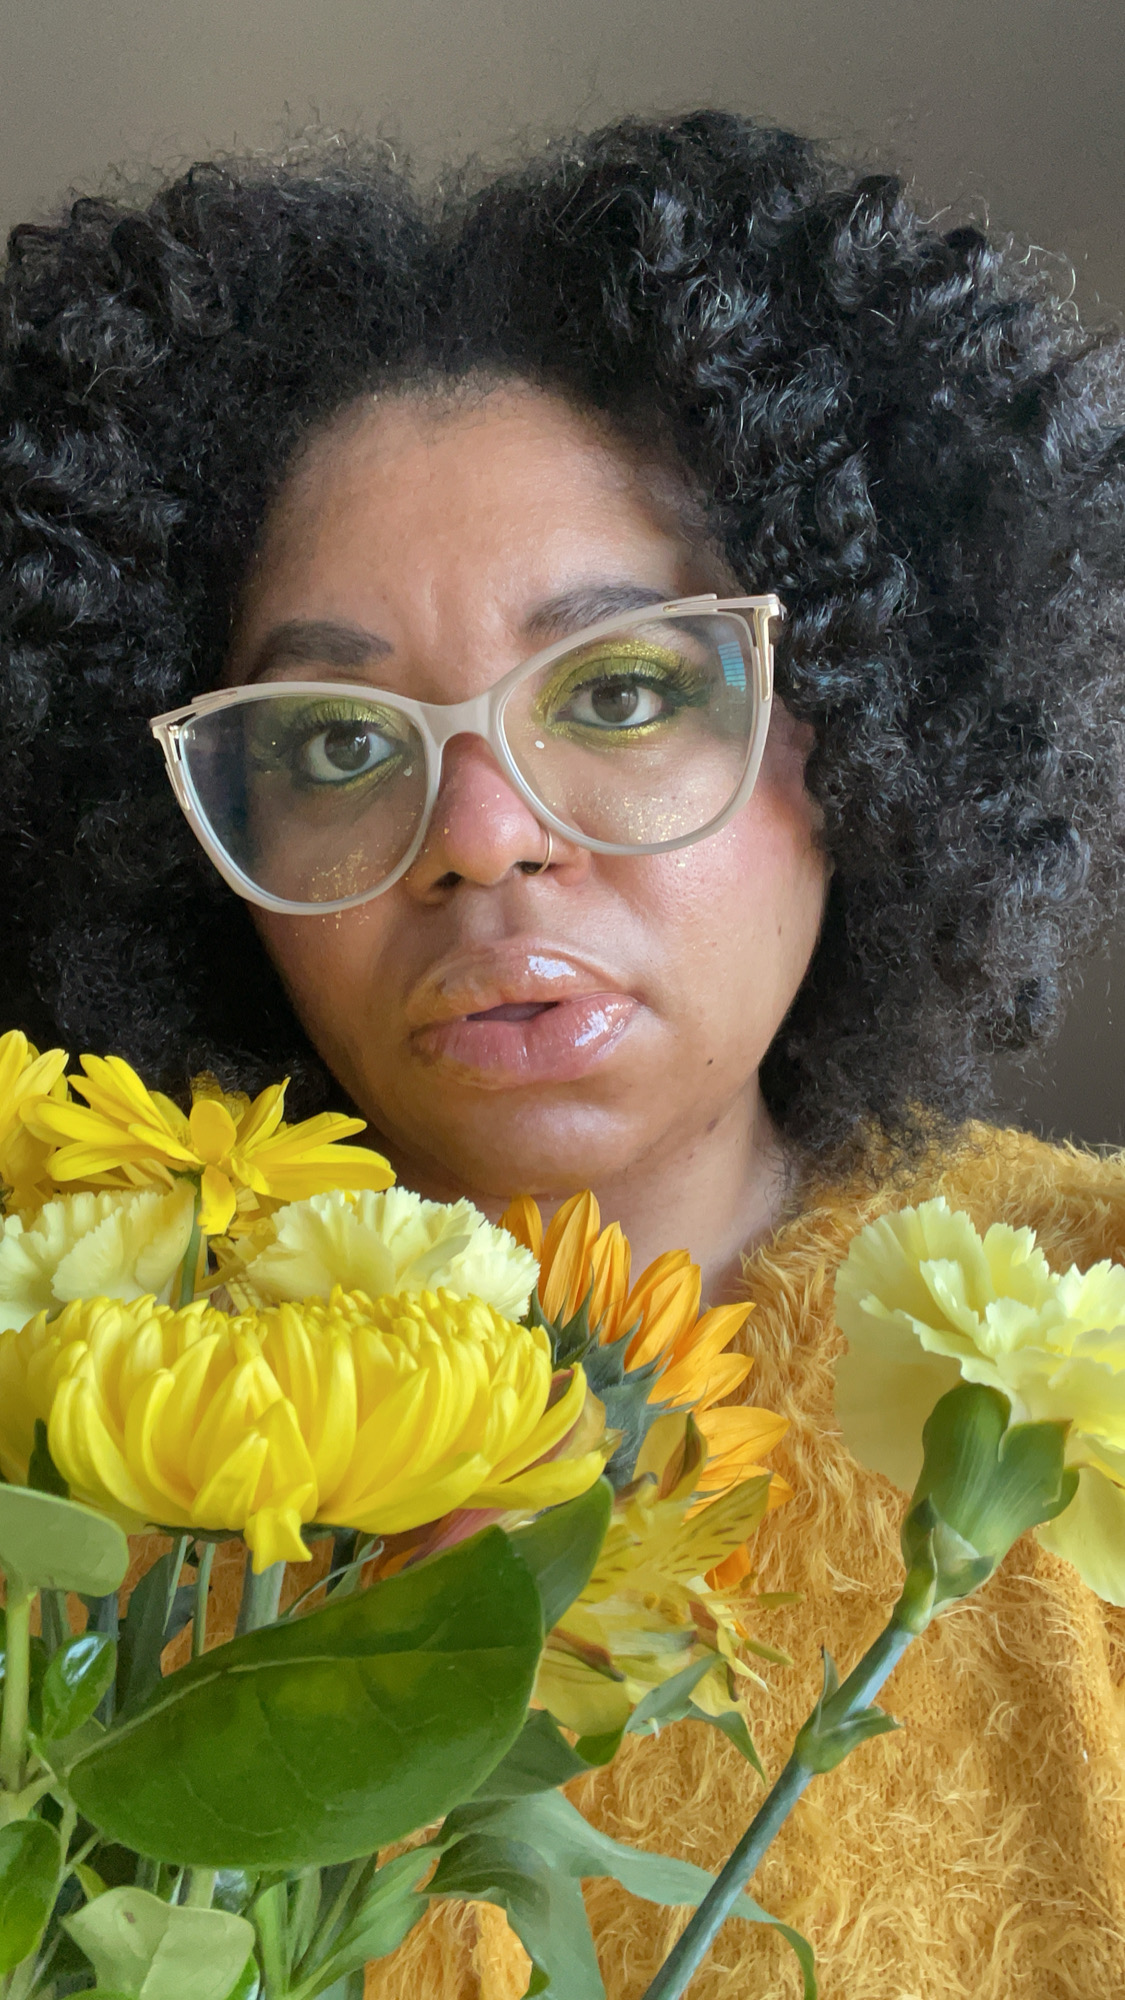 Dani is a Black woman with shiny, loosely curled hair and large vintage-inspired glasses. She is gazing at the viewer and holding a bouquet of gold, yellow and orange flowers and is wearing a matching gold top.